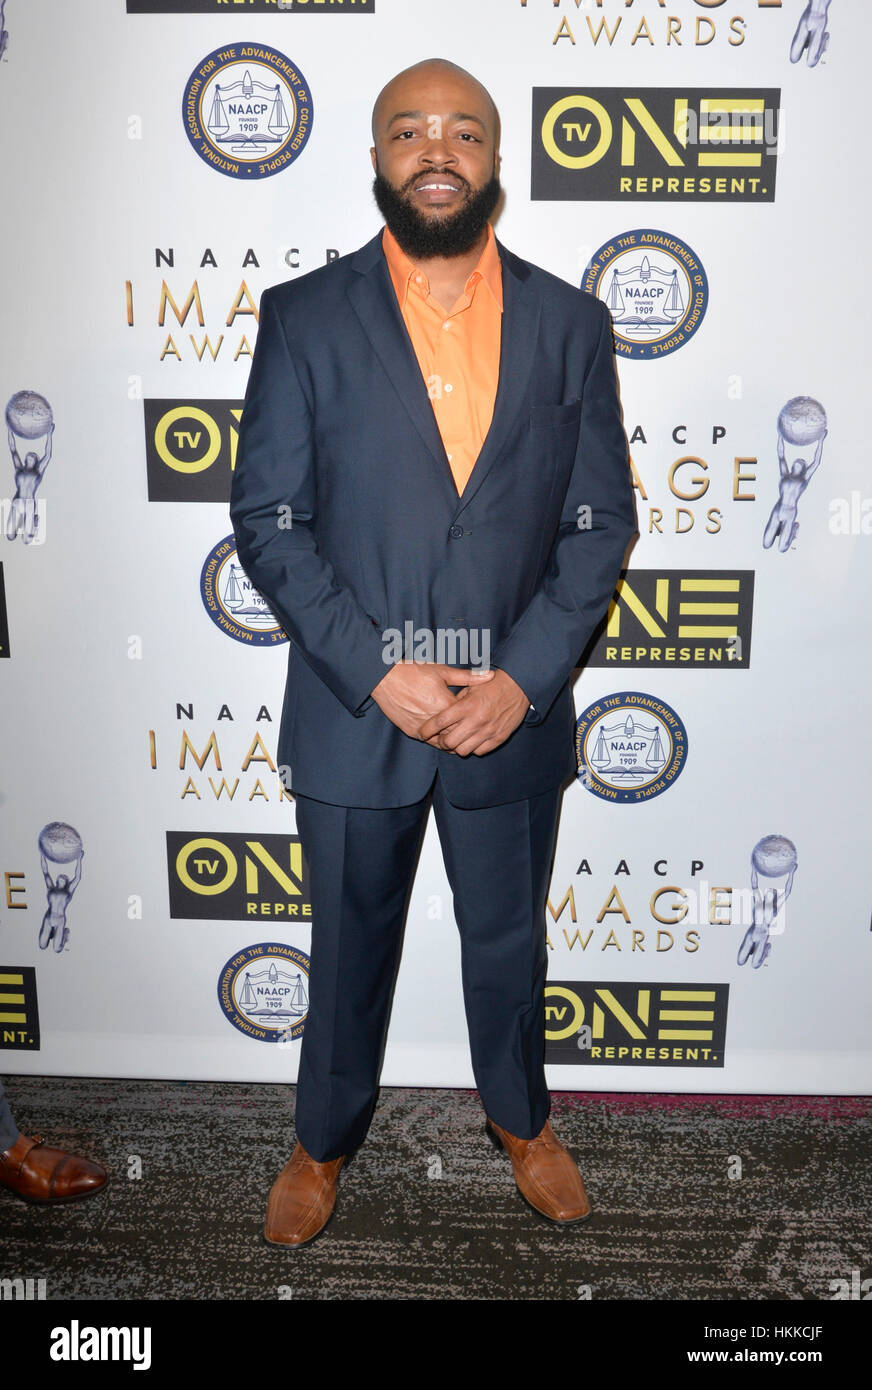 Hollywood, USA. 28th Jan, 2017. George Clements at the 48th NAACP Image Awards Nominees' Luncheon at The Loews Hollywood Hotel in Hollywood, California. Credit: Koi Sojer/Snap'n U Photos/Media Punch/Alamy Live News Stock Photo